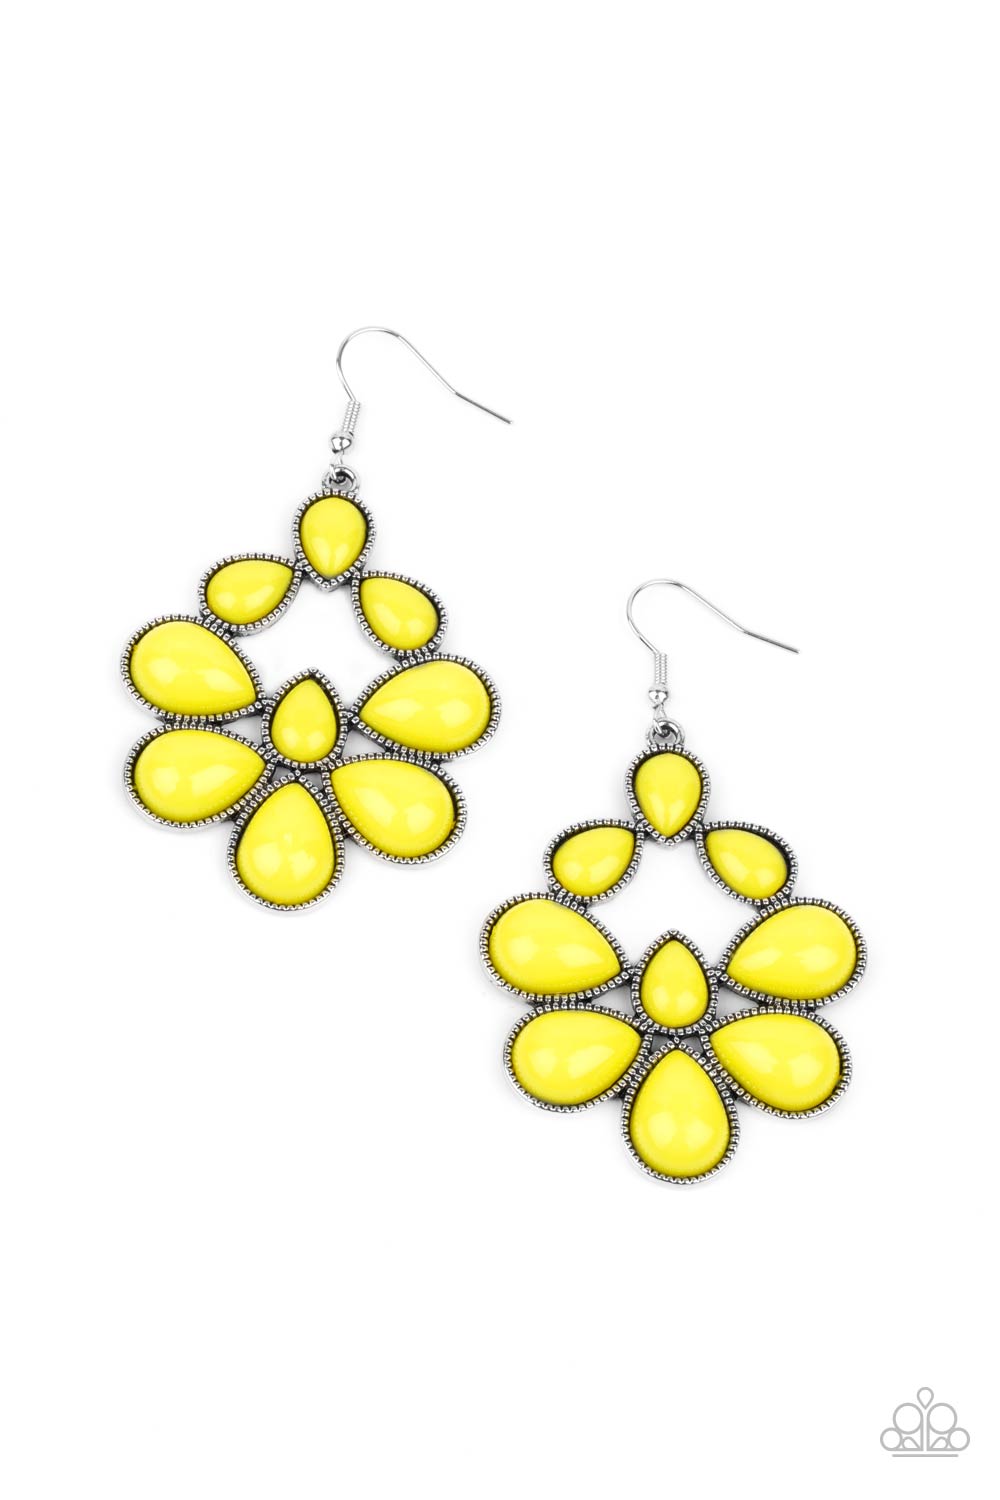 Paparazzi In Crowd Couture - Yellow - Earrings - $5 Jewelry with Ashley Swint